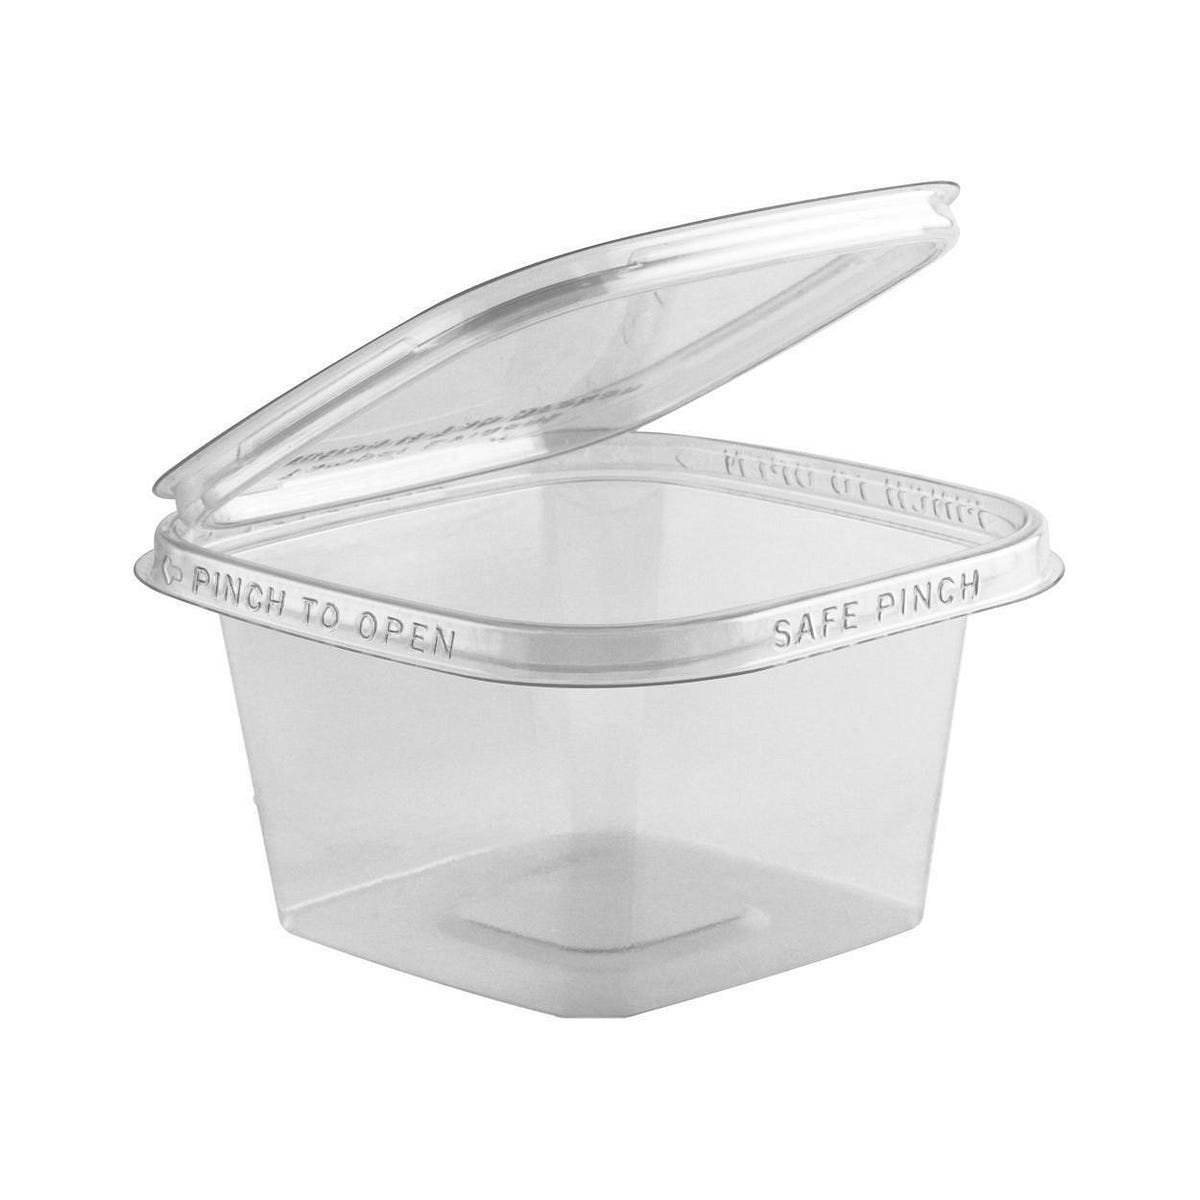 Tamper Evident Sandwich Wrap Container